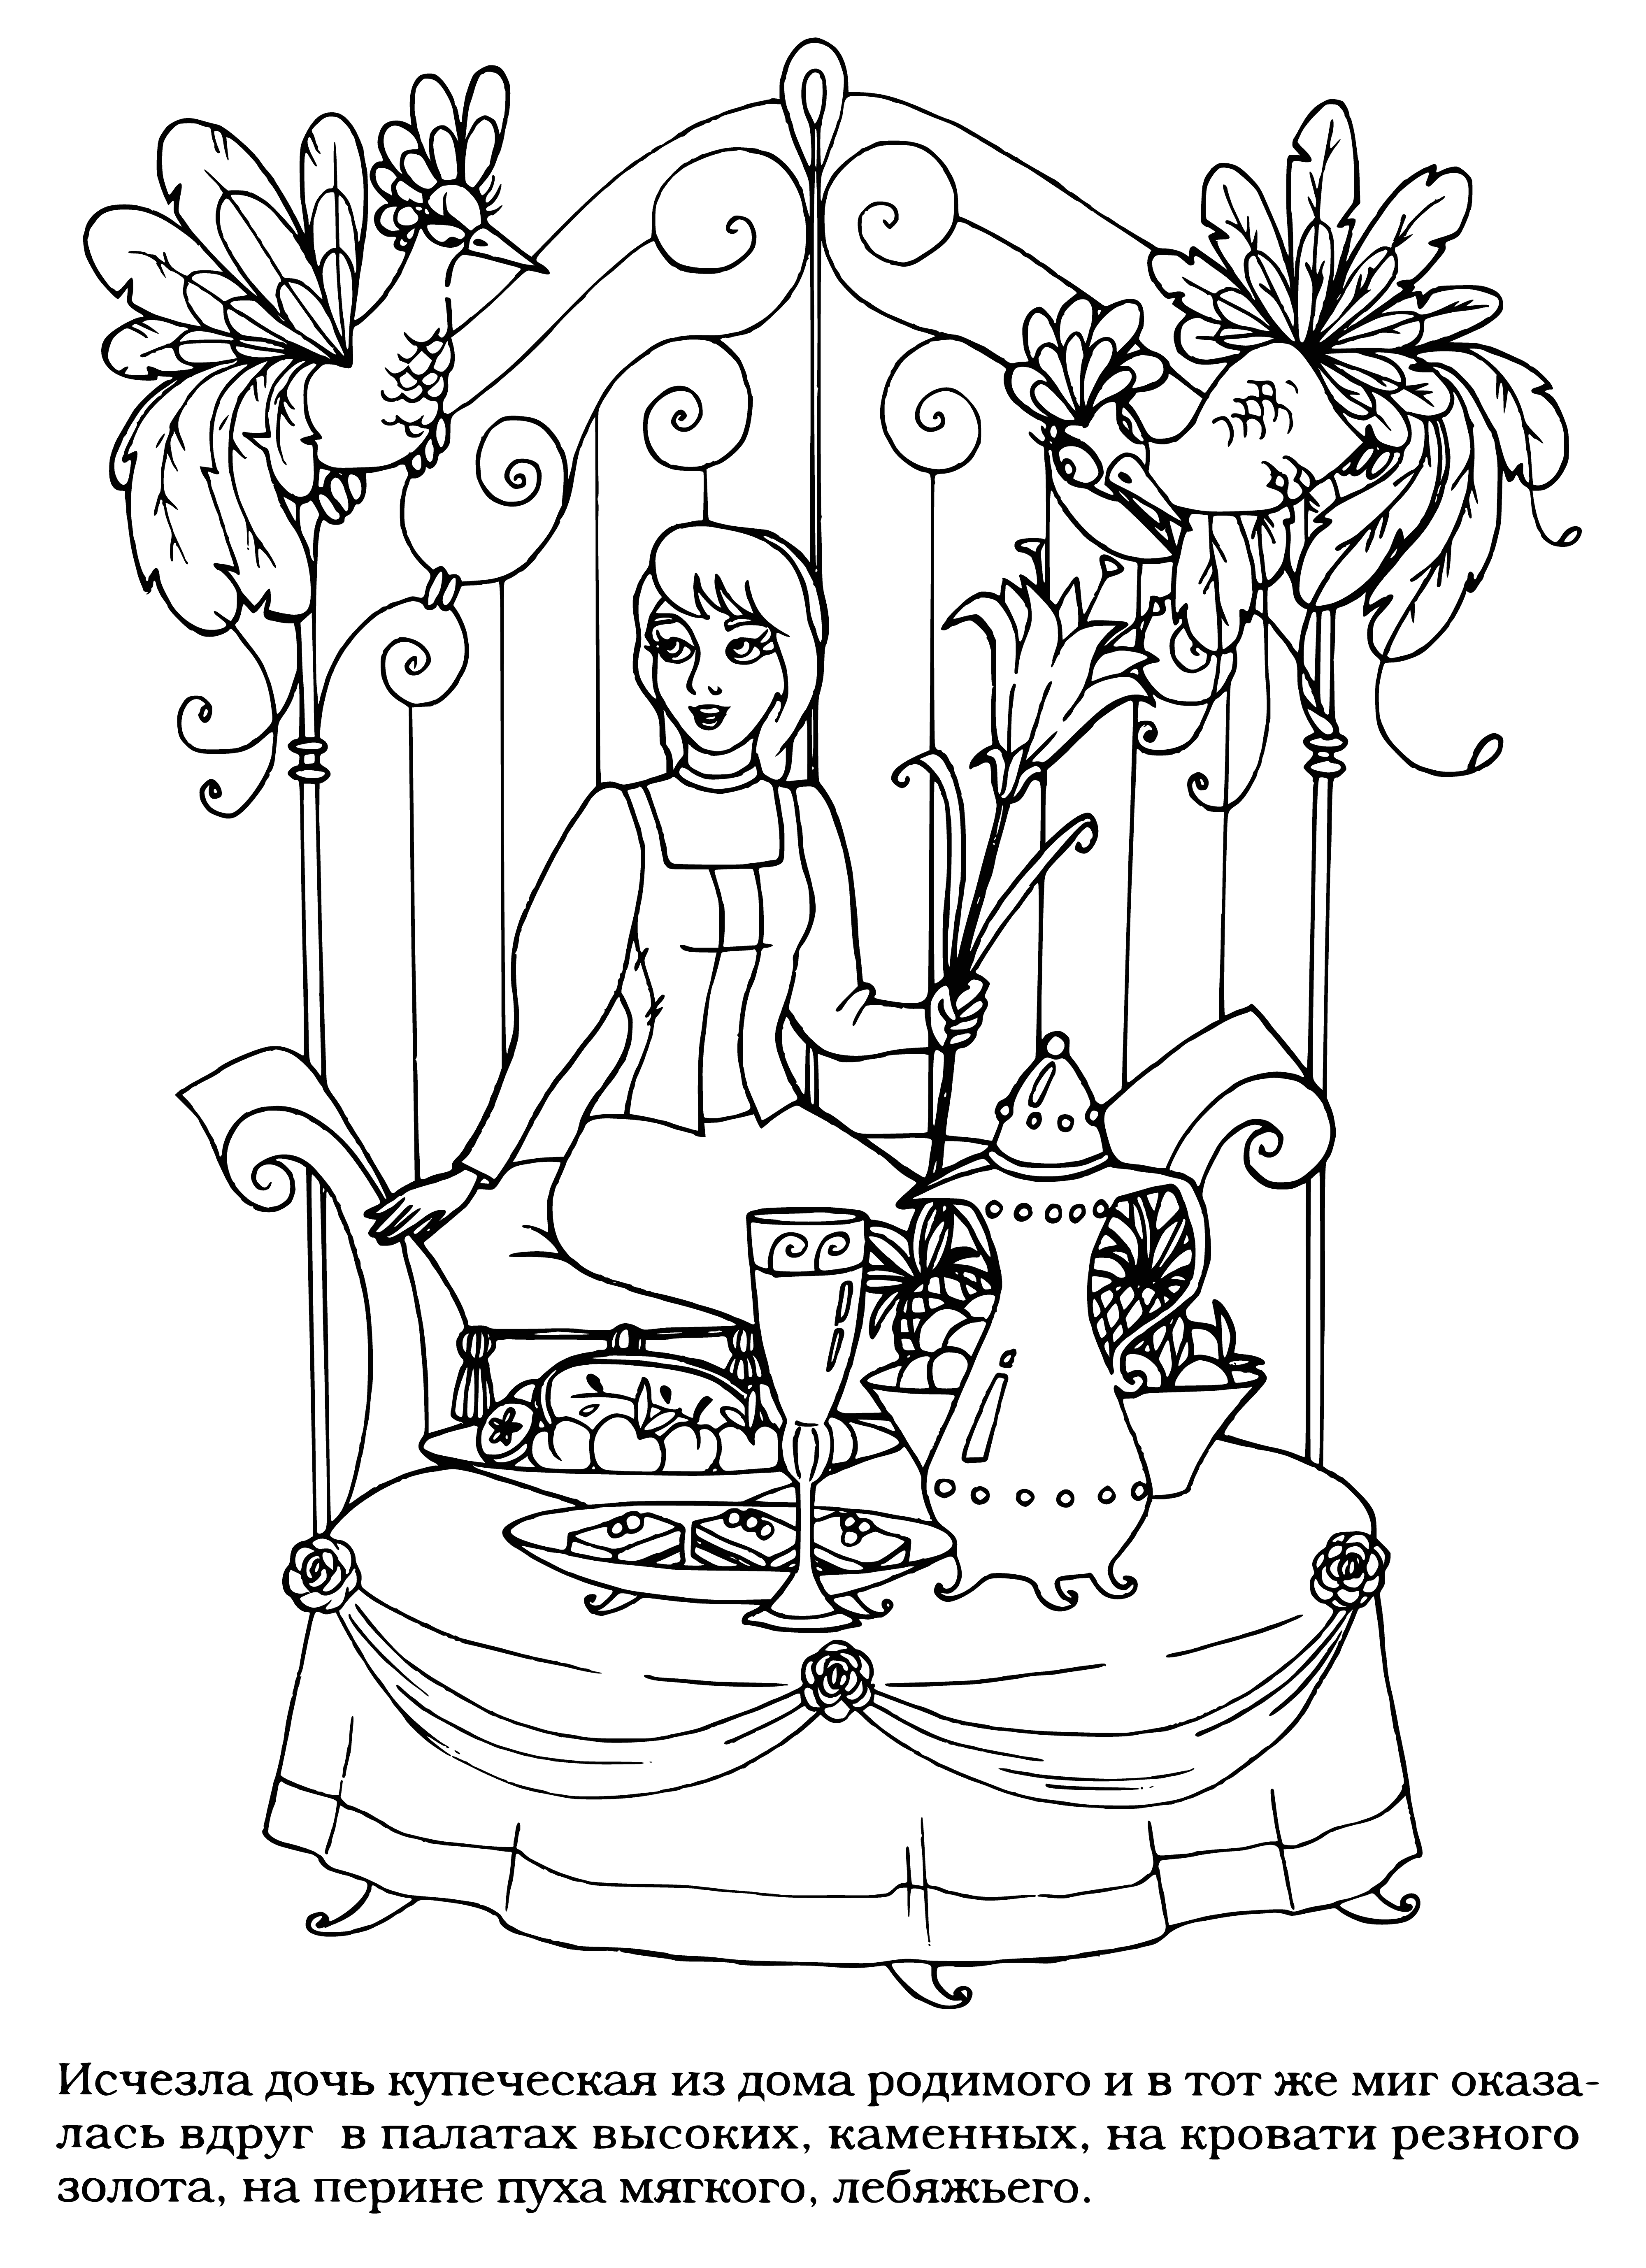 Wonderful garden coloring page